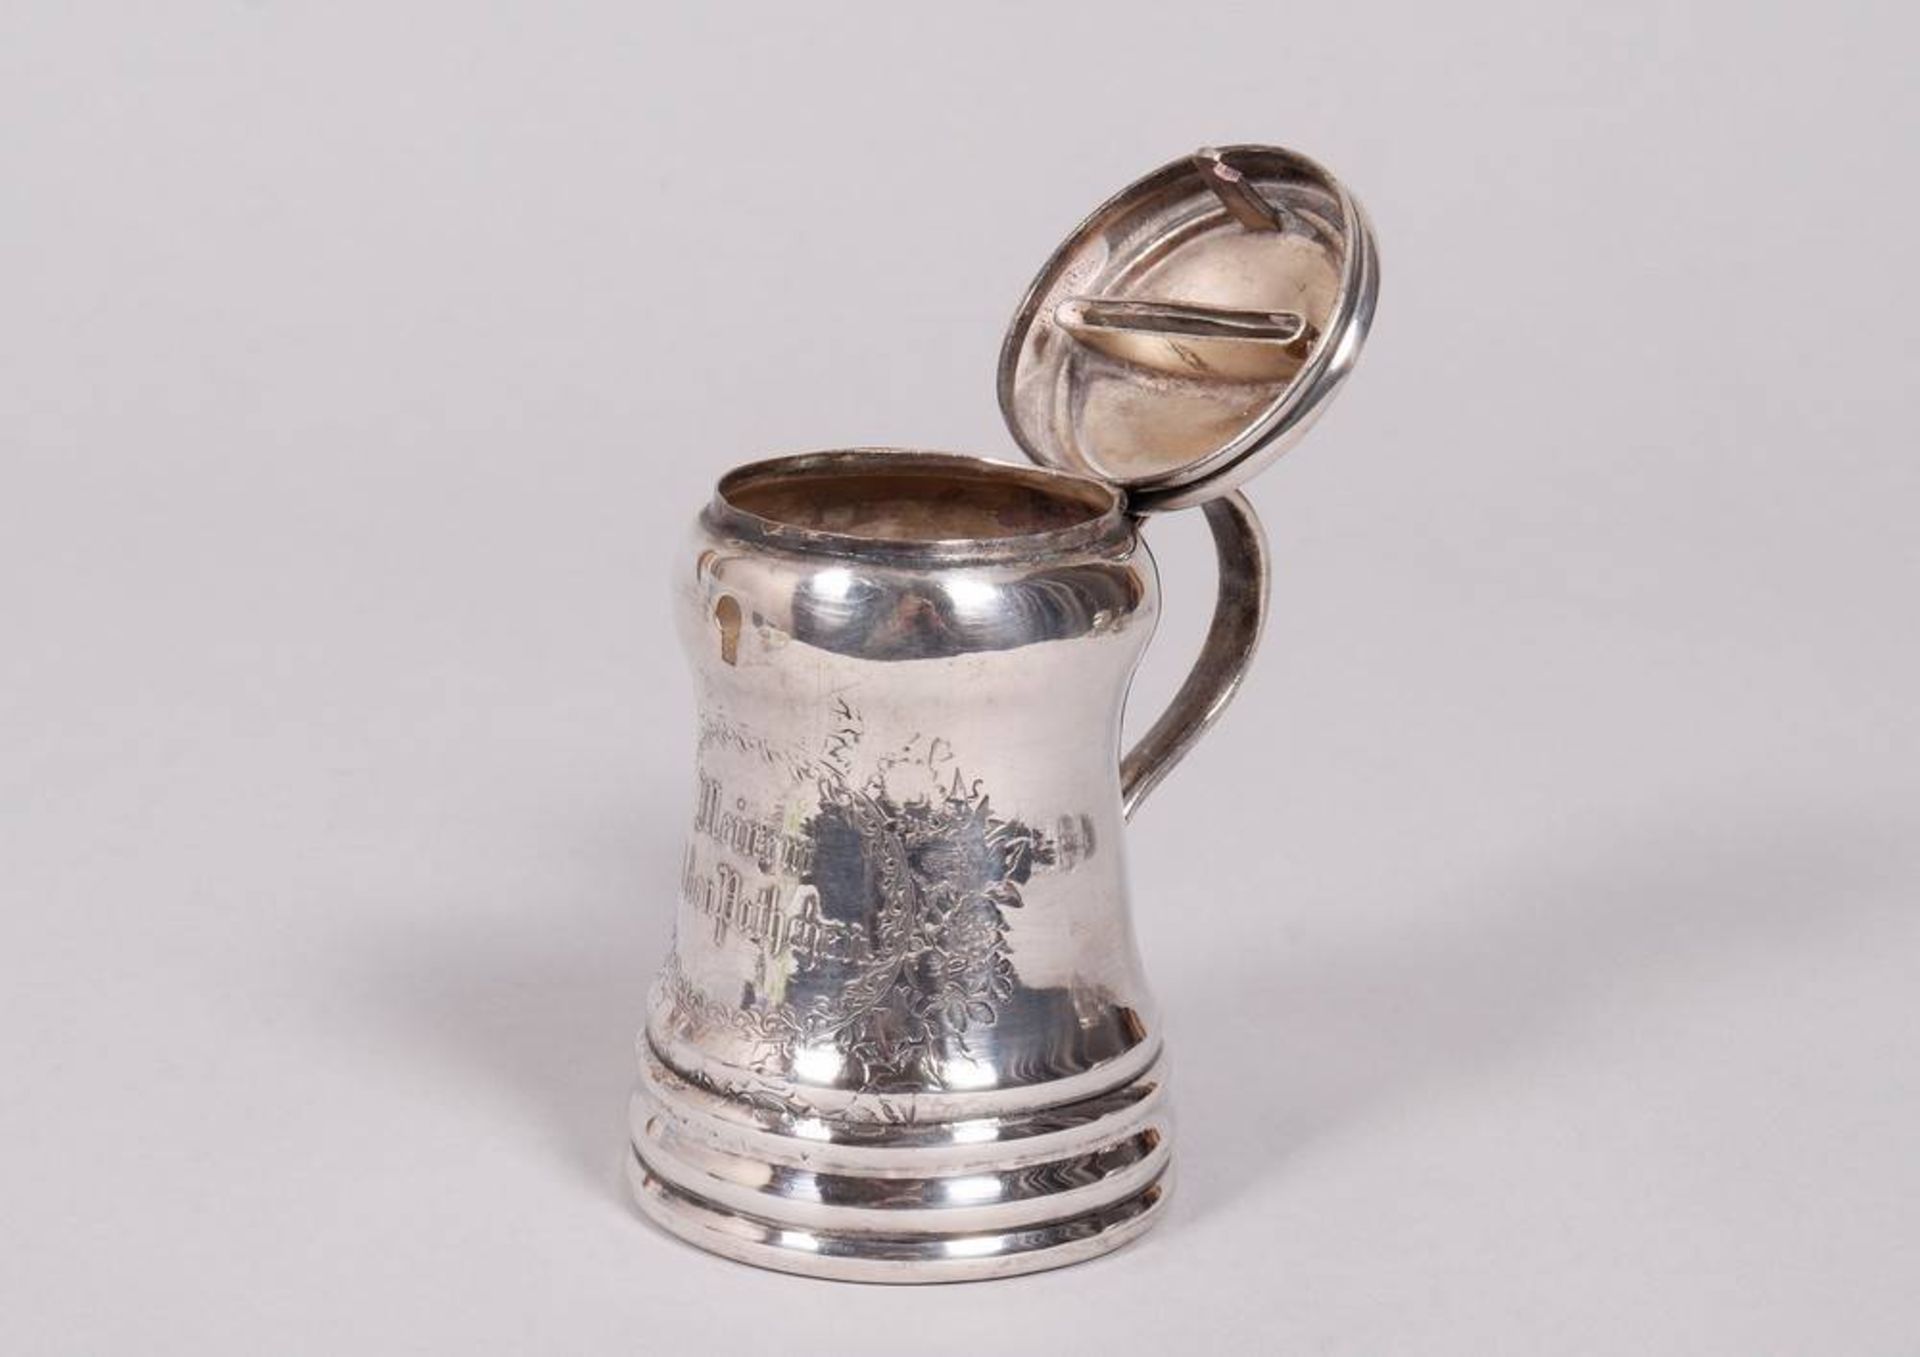 Small money box, silver, probably German, late 19th C. - Image 4 of 4